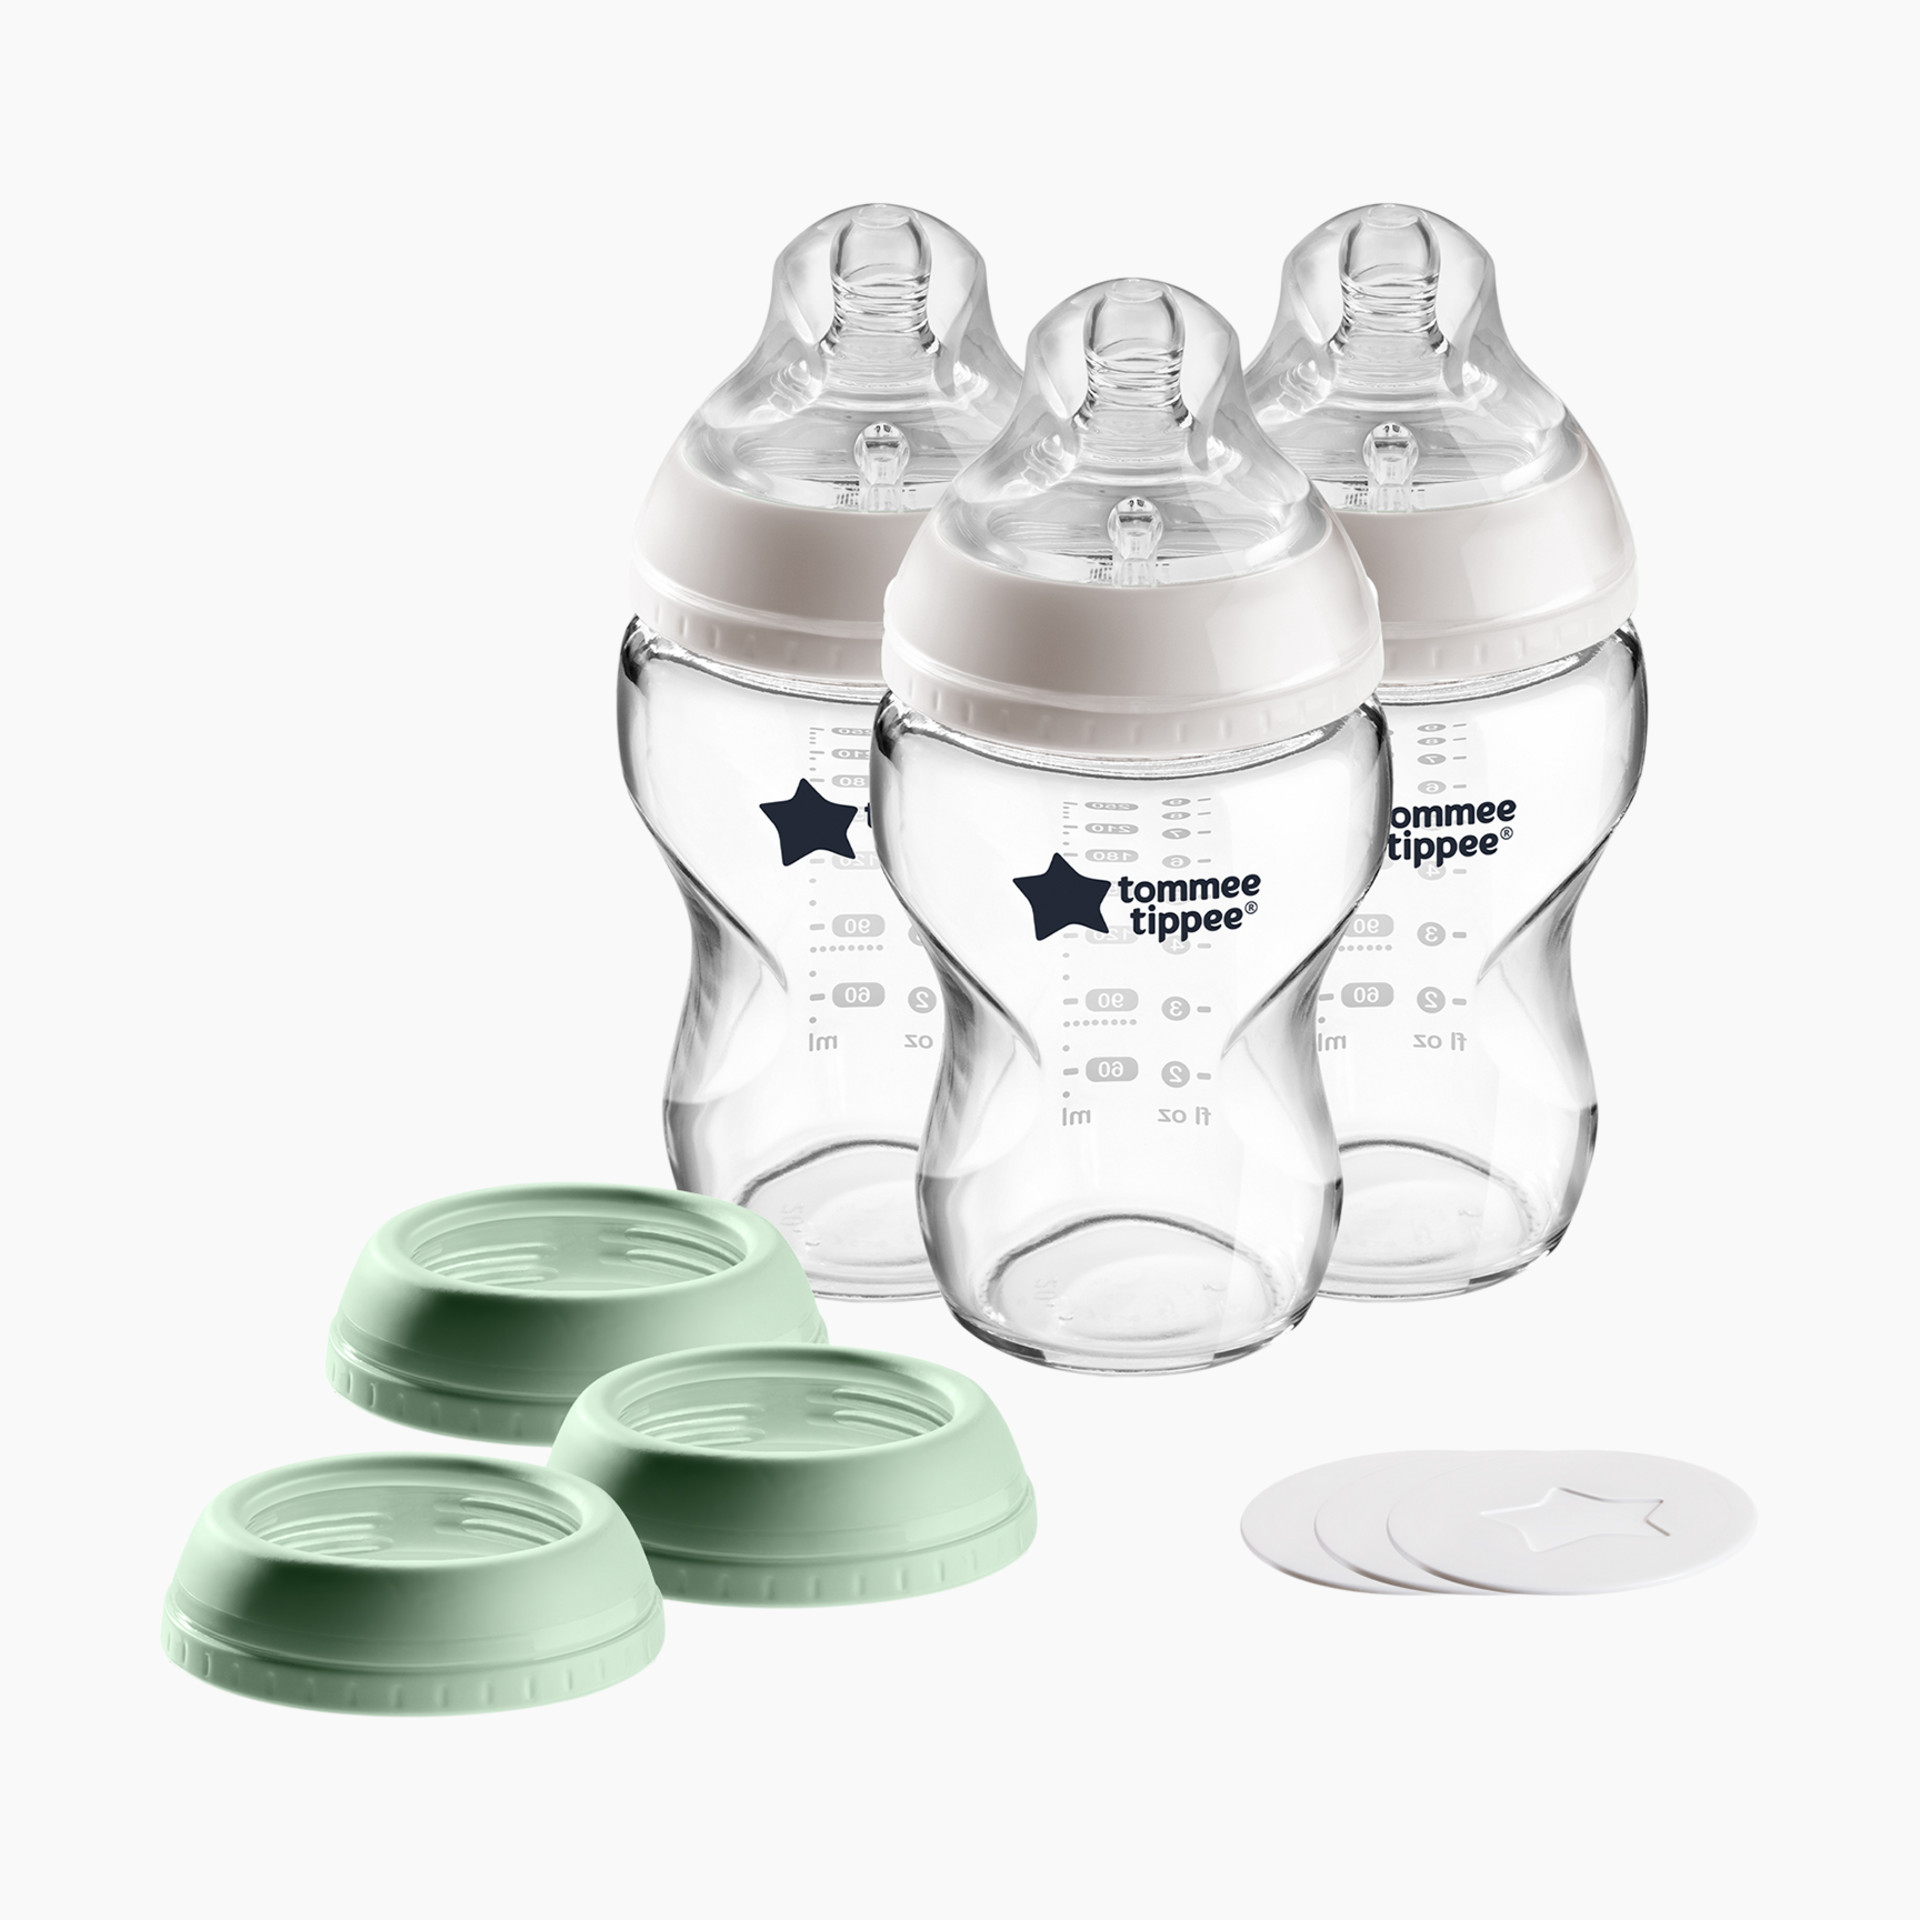 Tommee Tippee 1st Bottle Solution, Baby Bottle Gift Set, Anti-Colic,  Breast-like Nipples, Travel Lids